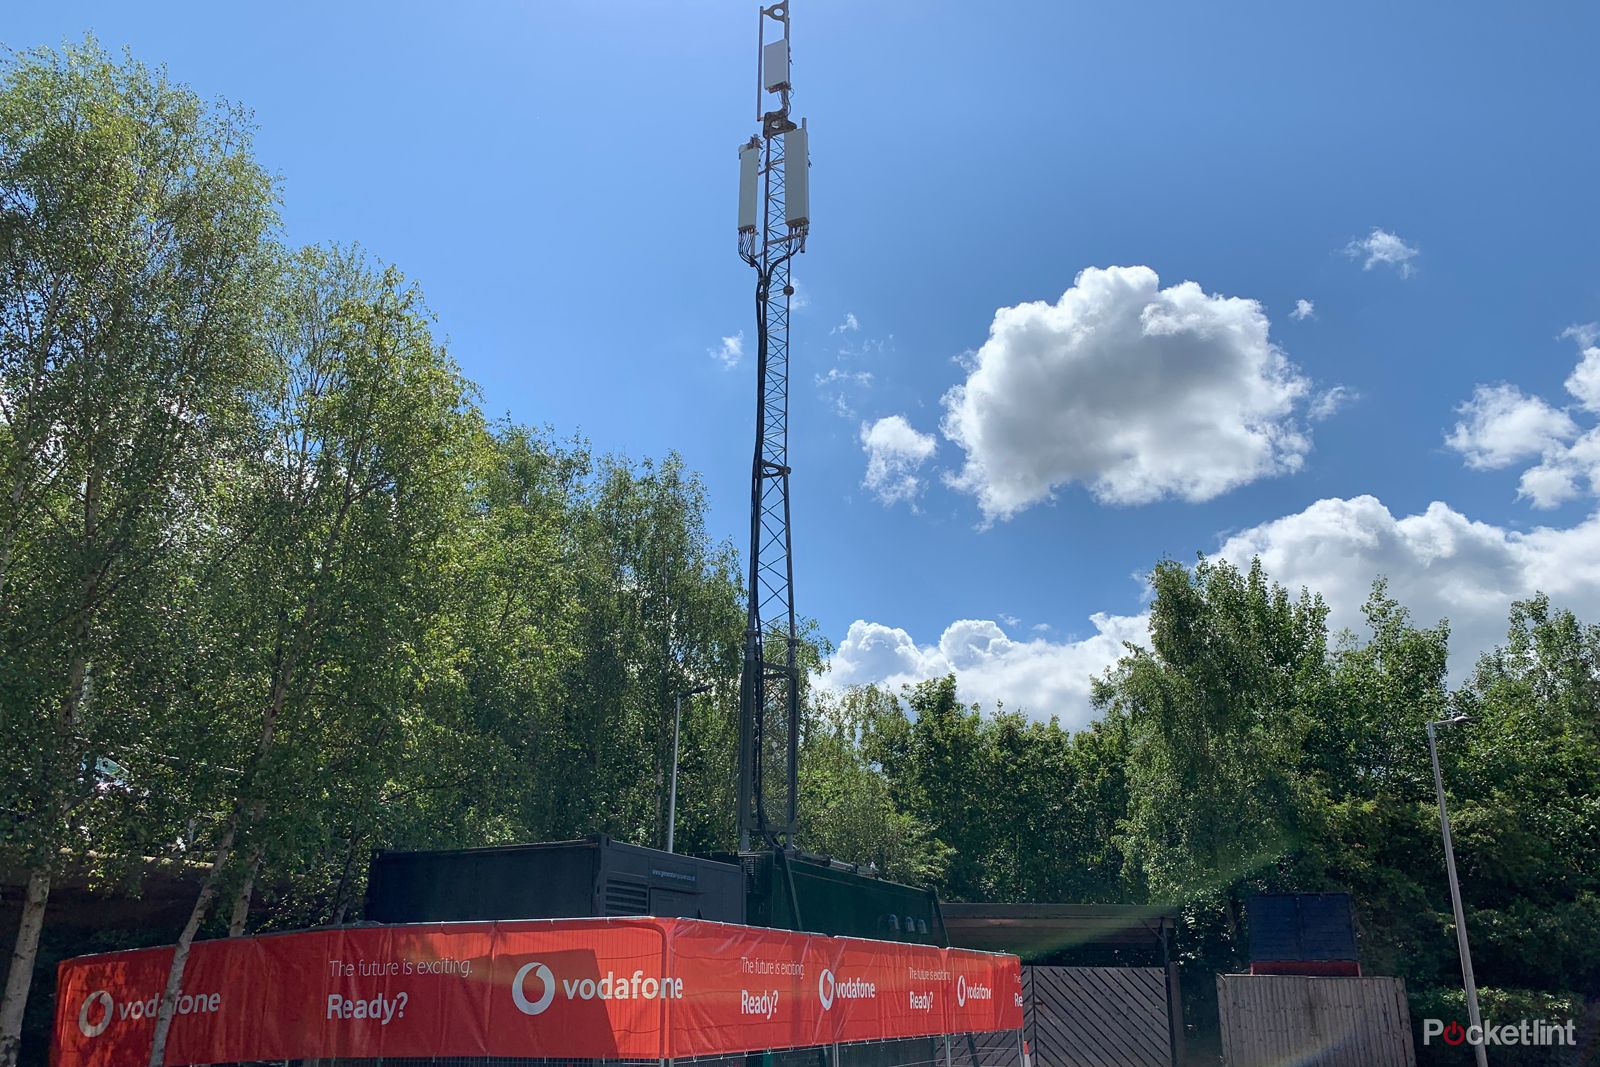 Vodafones 5G network goes live today image 3